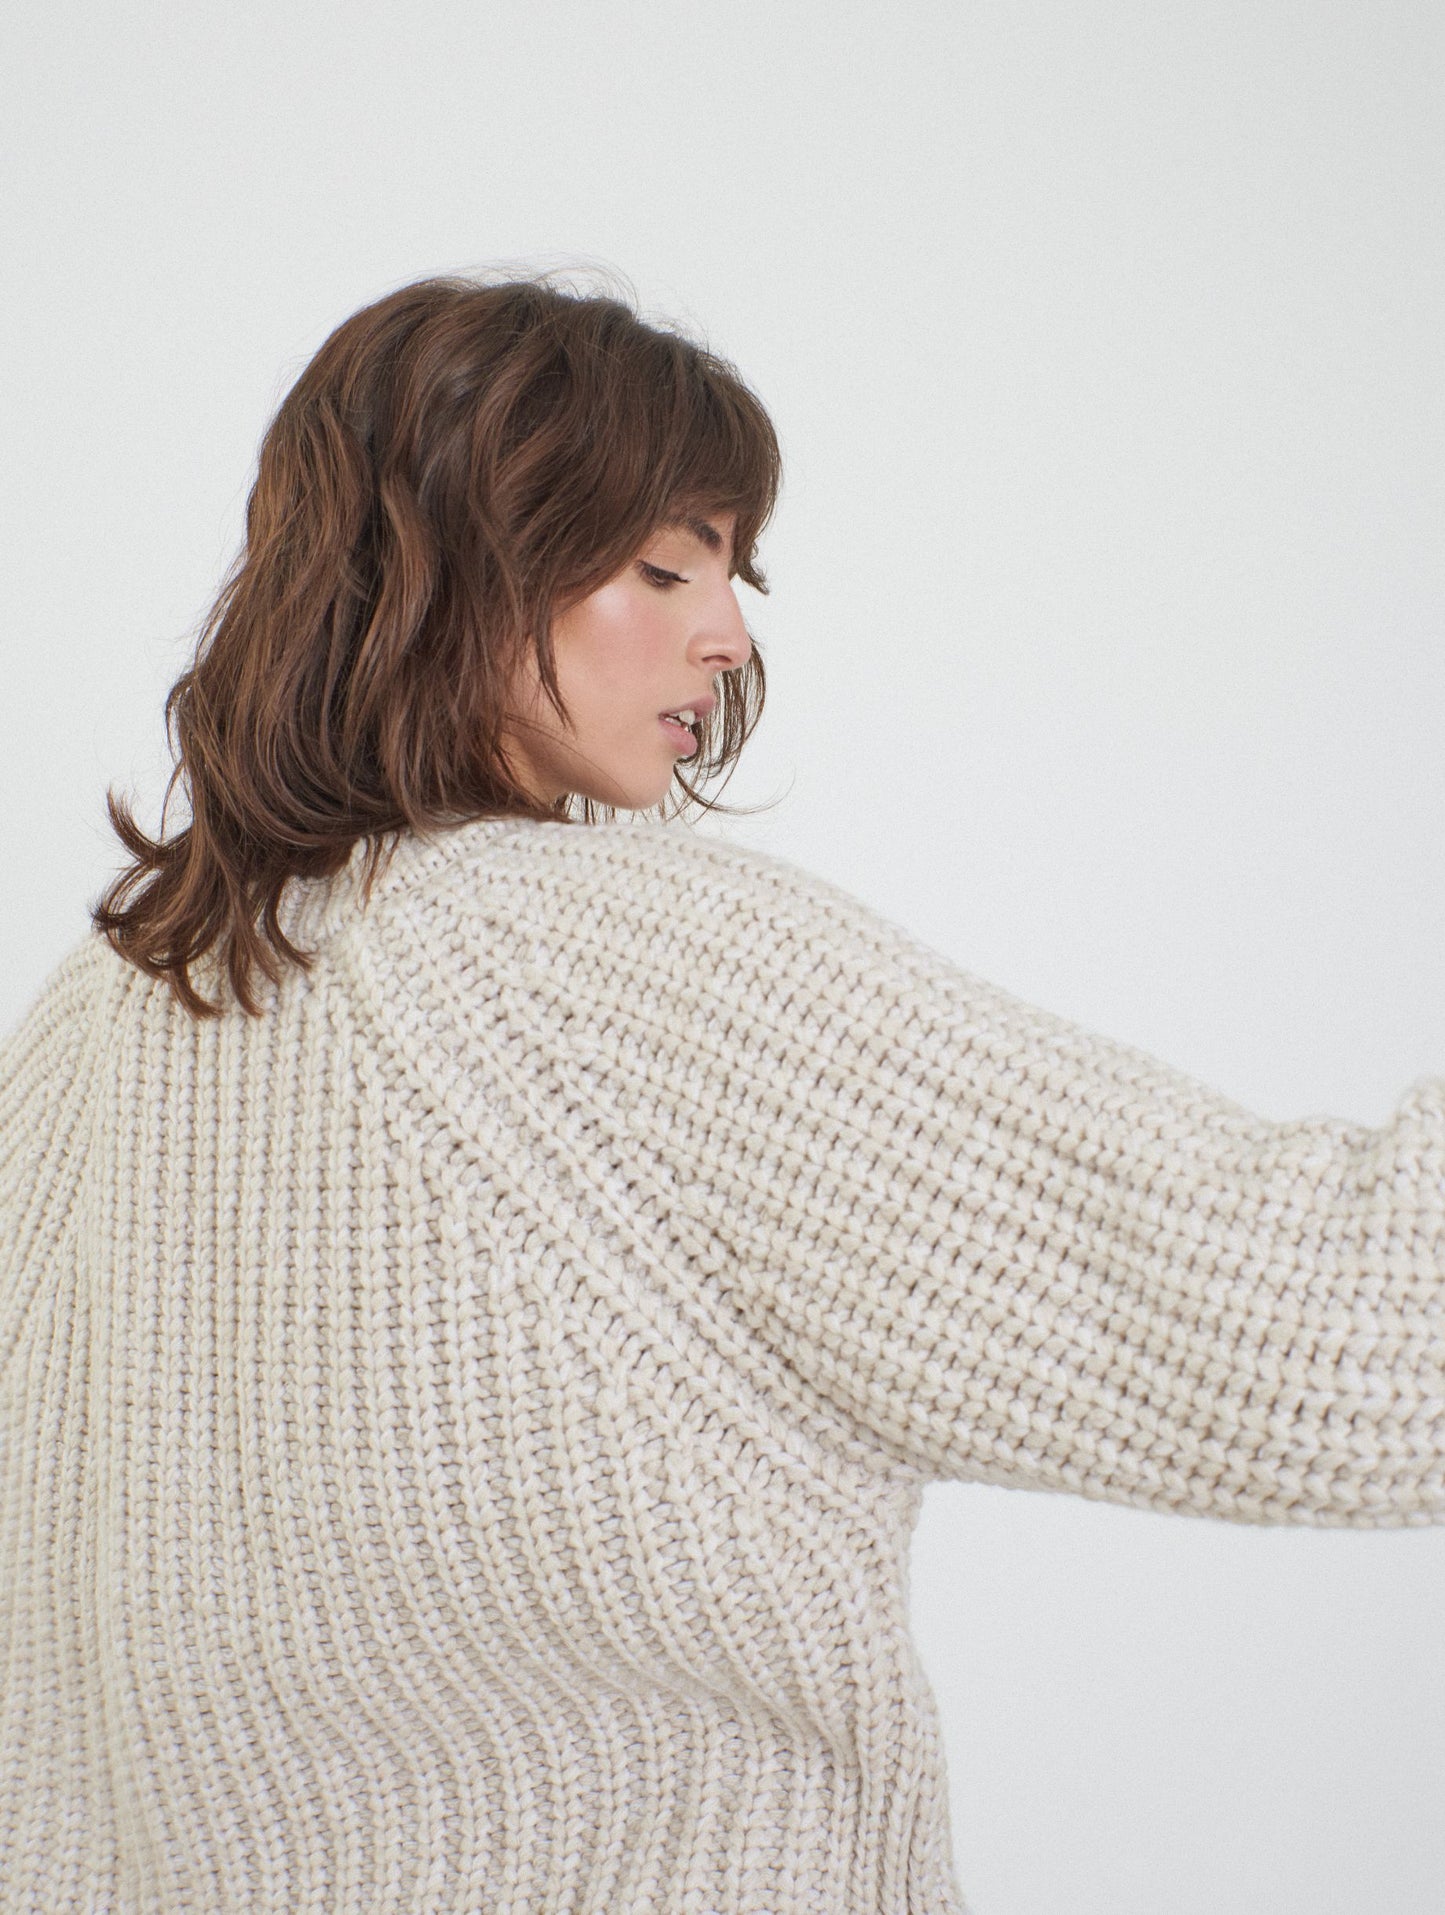 Cashmere knitted chunky jumper